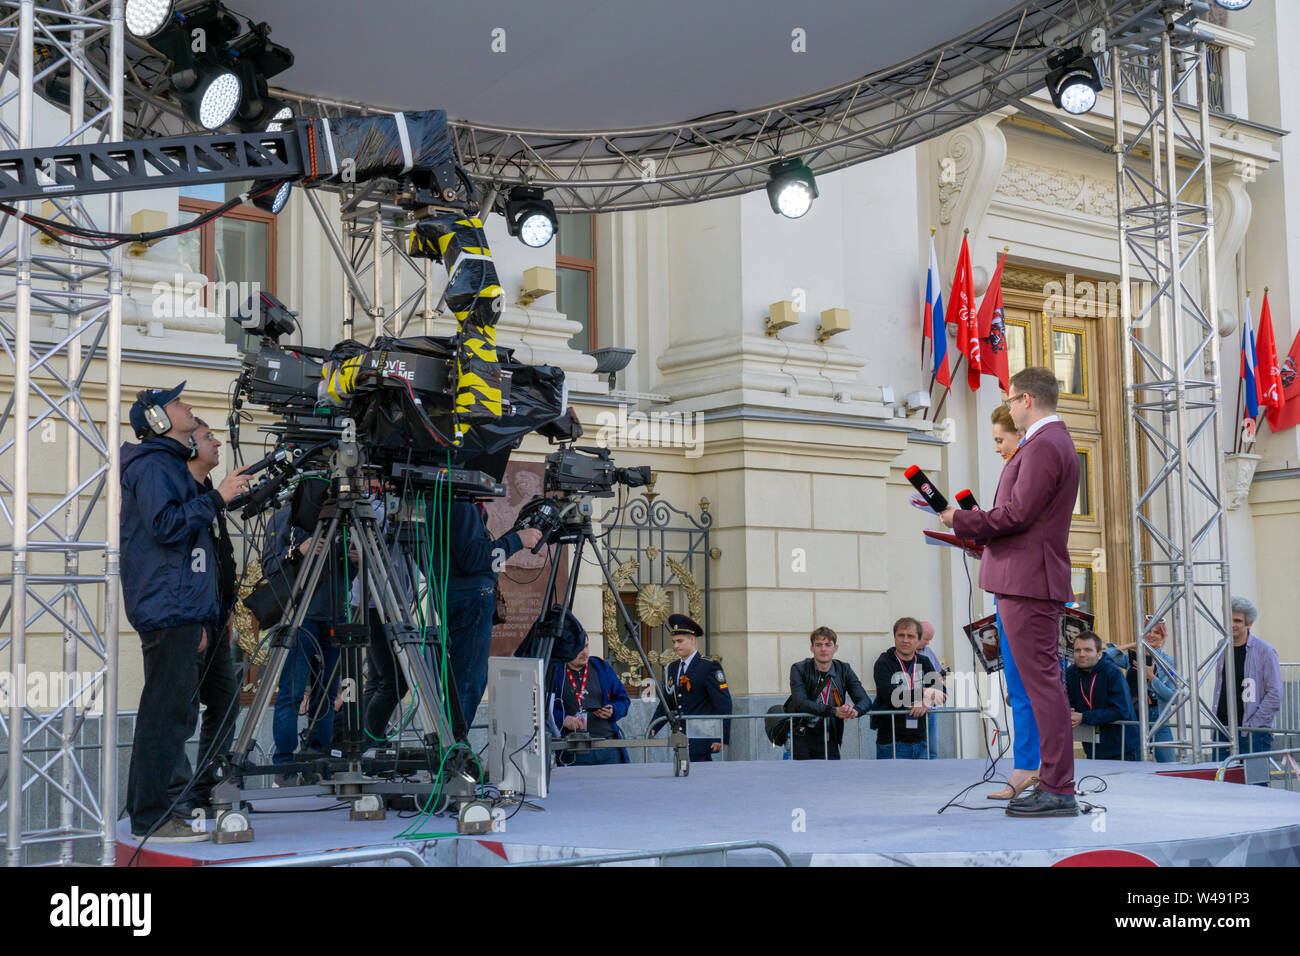 MOSCOW, RUSSIA - MAY 9, 2019: Recording TV program during the Victory Day Parade. TVC channel journalists are interviewing parade participants. Stock Photo